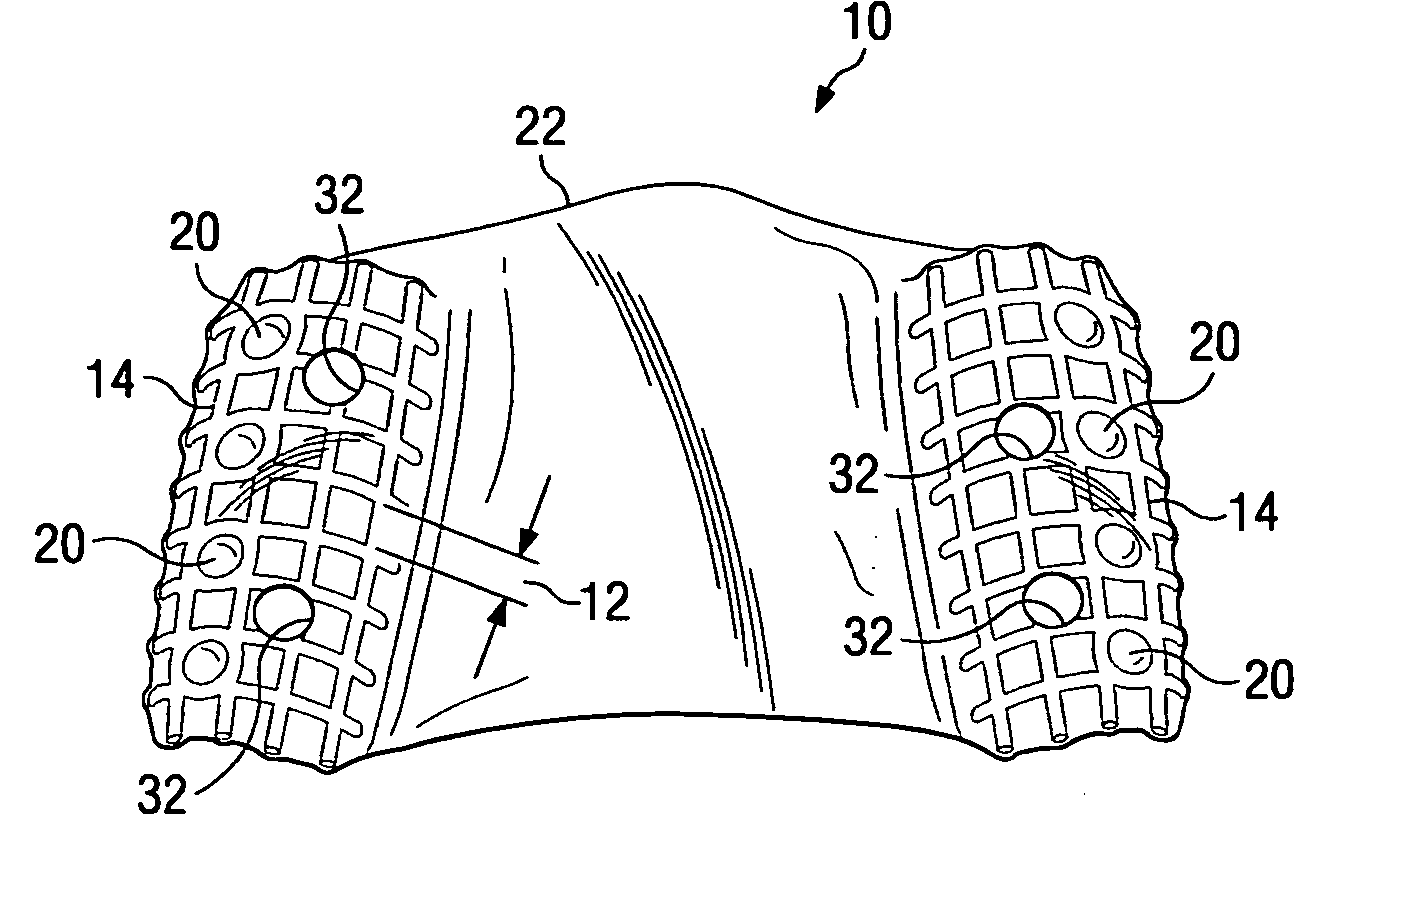 Dental implant placement locator and method of use